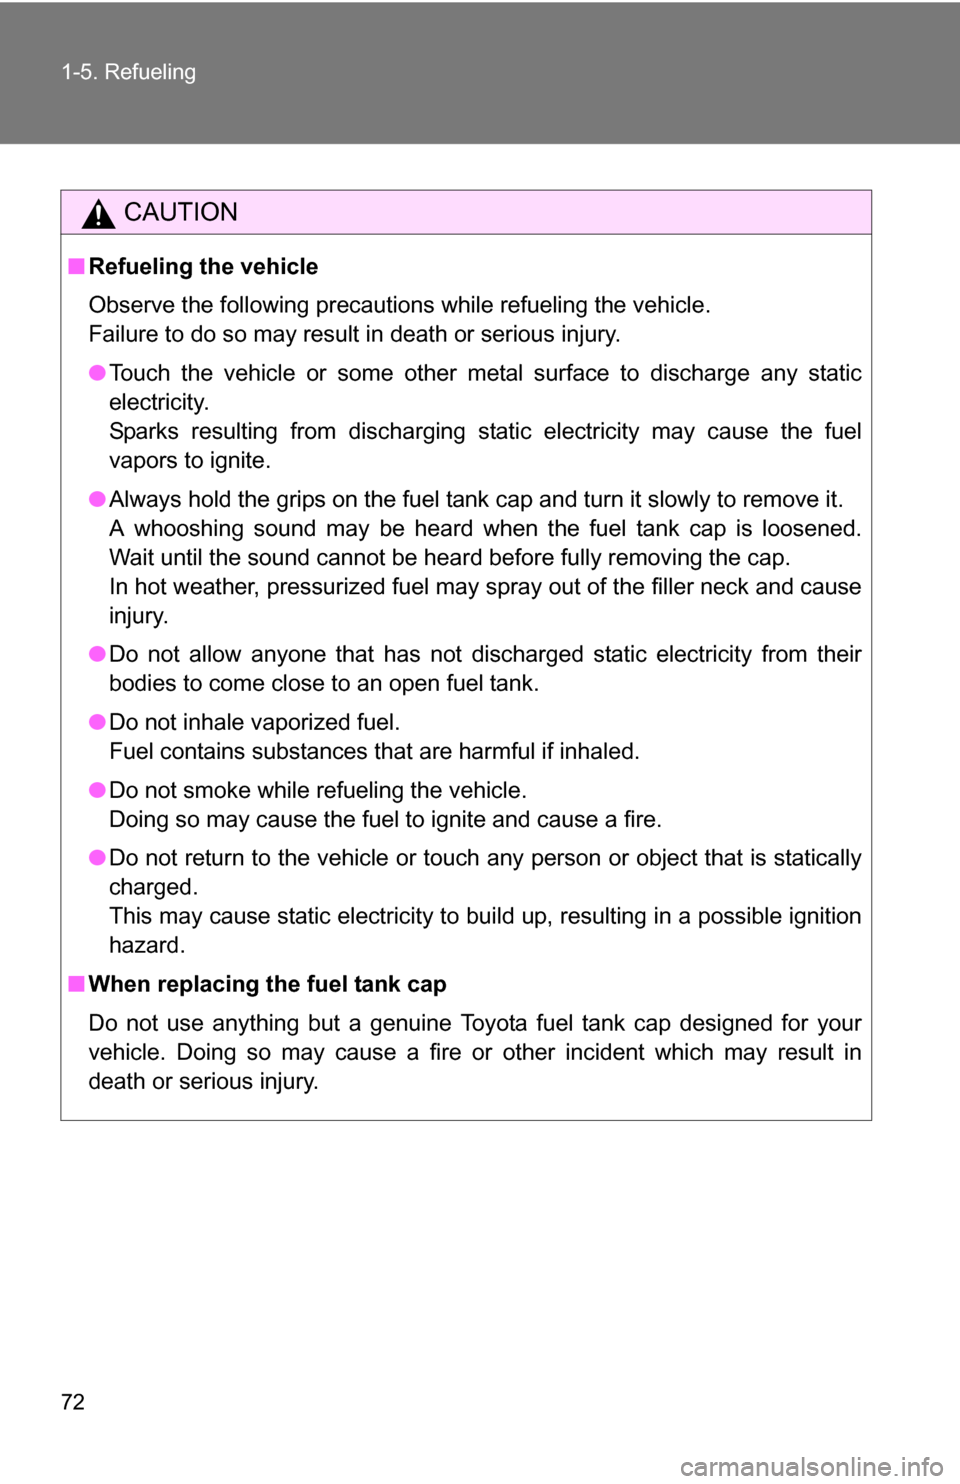 TOYOTA YARIS 2009 2.G Owners Manual 72 1-5. Refueling
CAUTION
■Refueling the vehicle
Observe the following precautions while refueling the vehicle. 
Failure to do so may result in death or serious injury.
●Touch the vehicle or some 